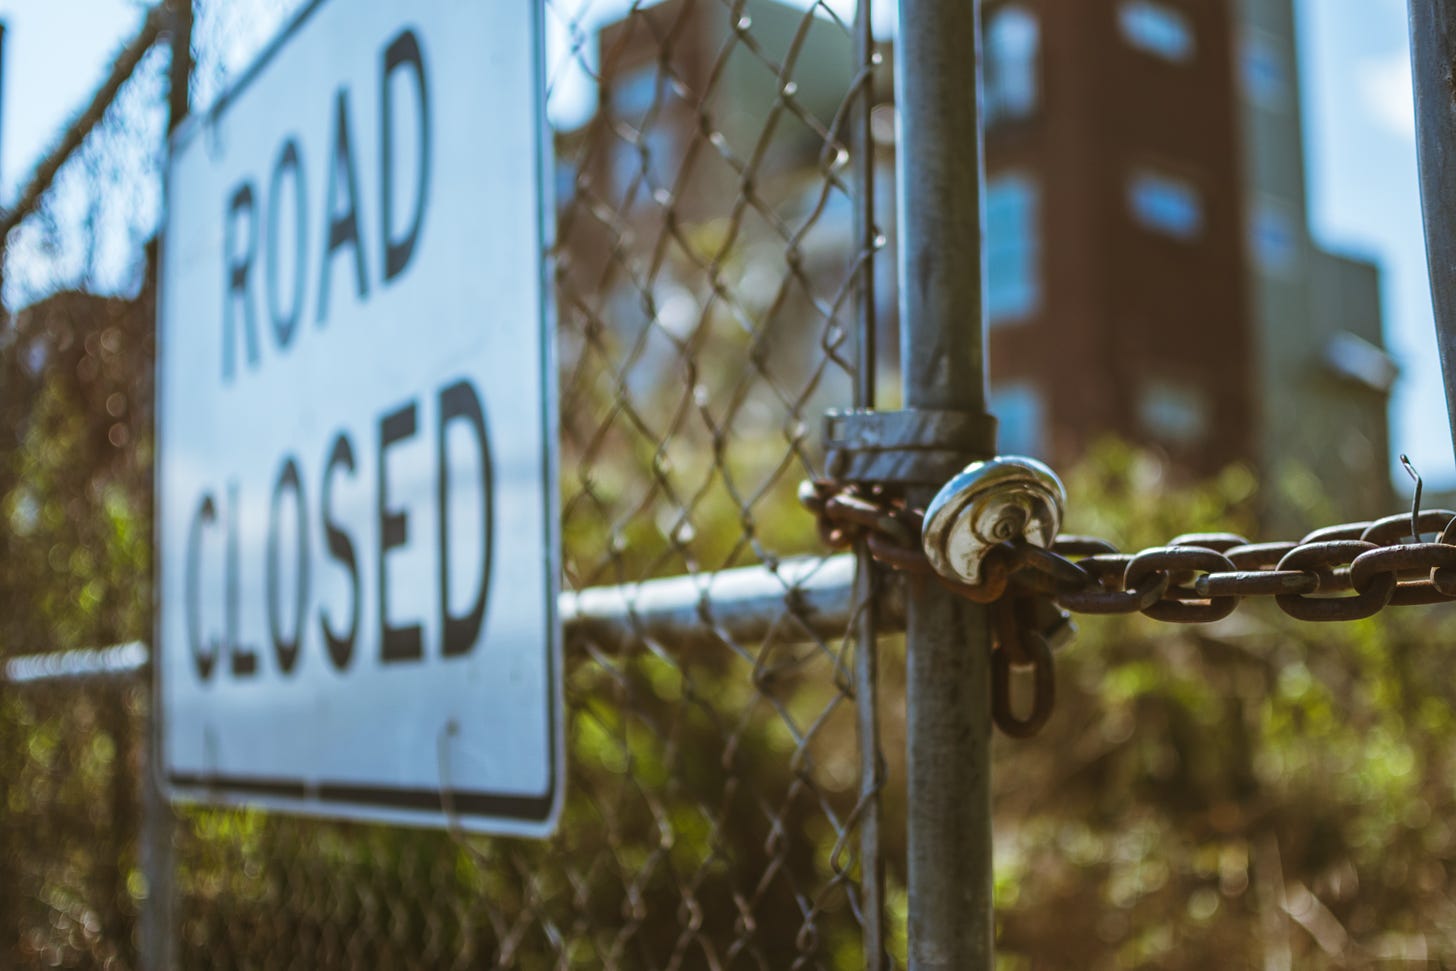  A chain link fence sealed with a rusted chain loop and lock, with a road closed sign in  front of a green  bush and a high  rise building.